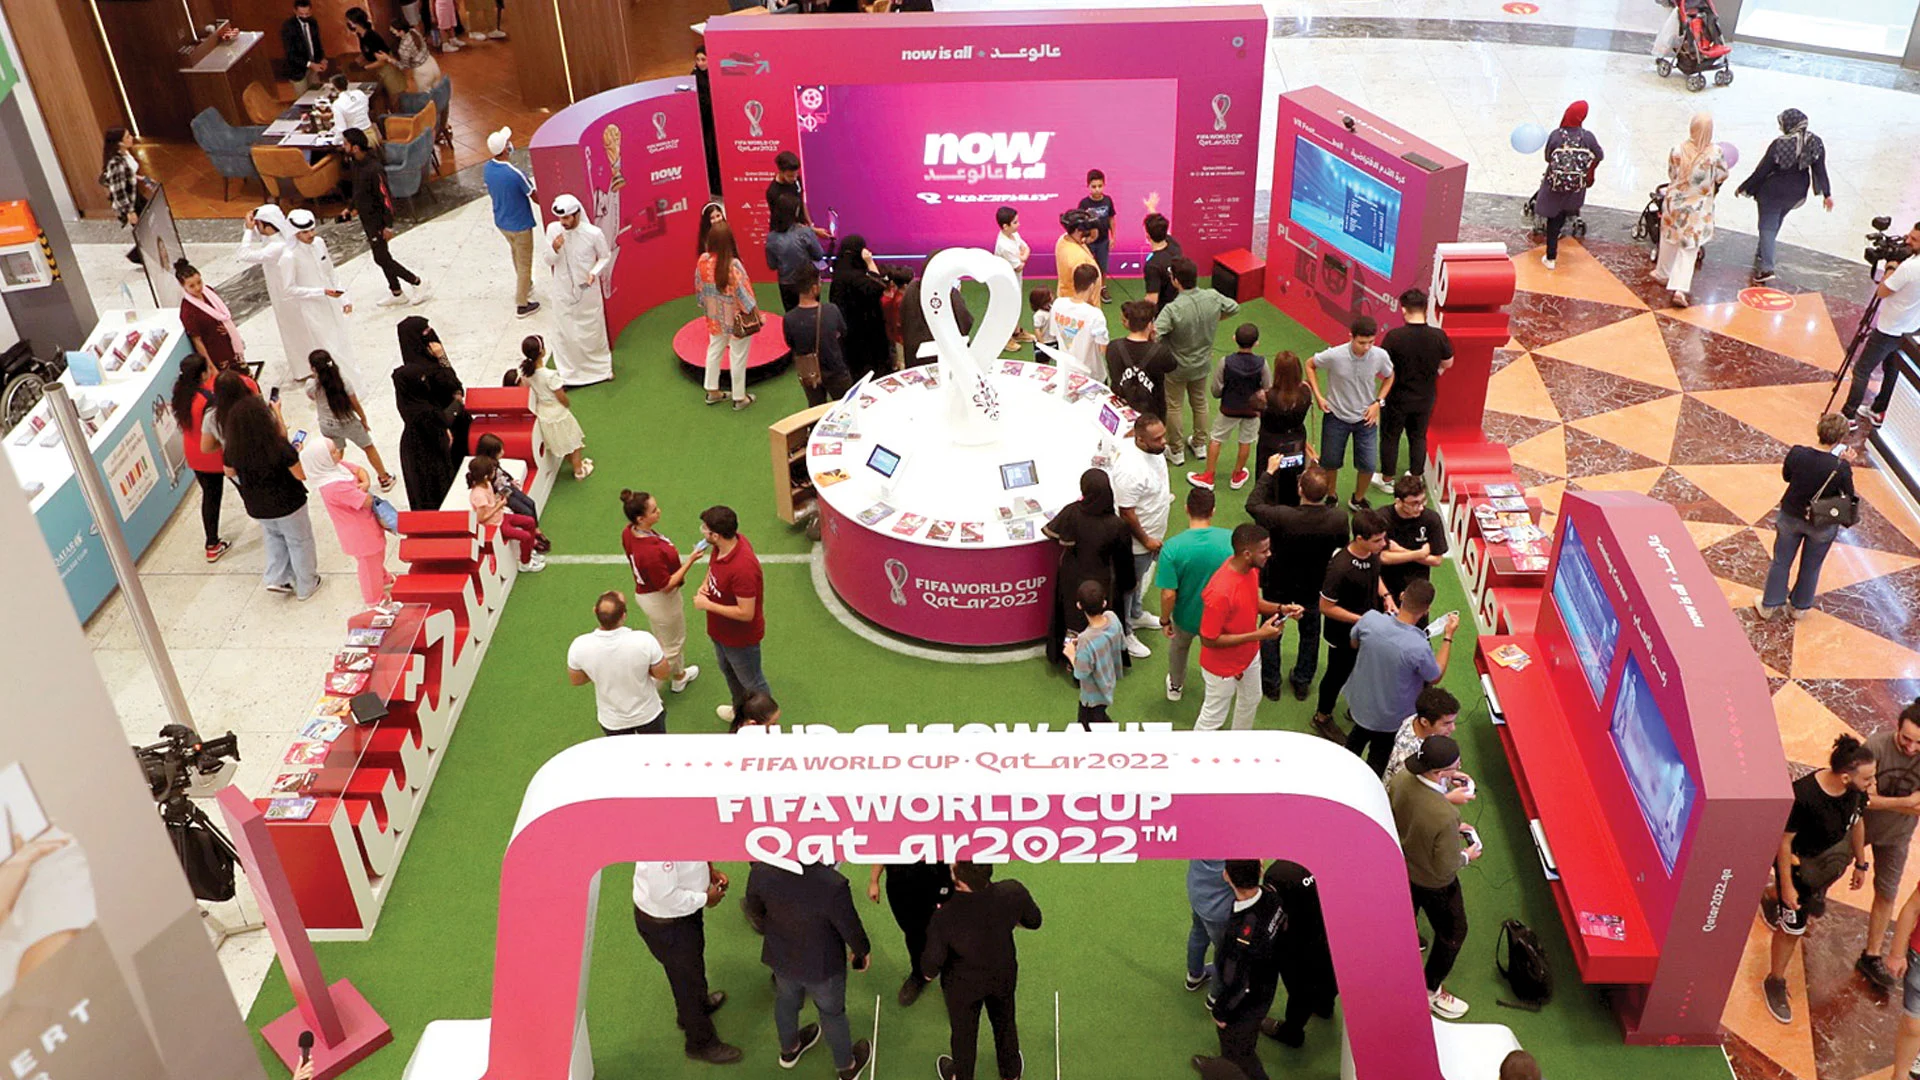 Qatar 2022: Huge Public Interaction with Promotional Activities in Malls